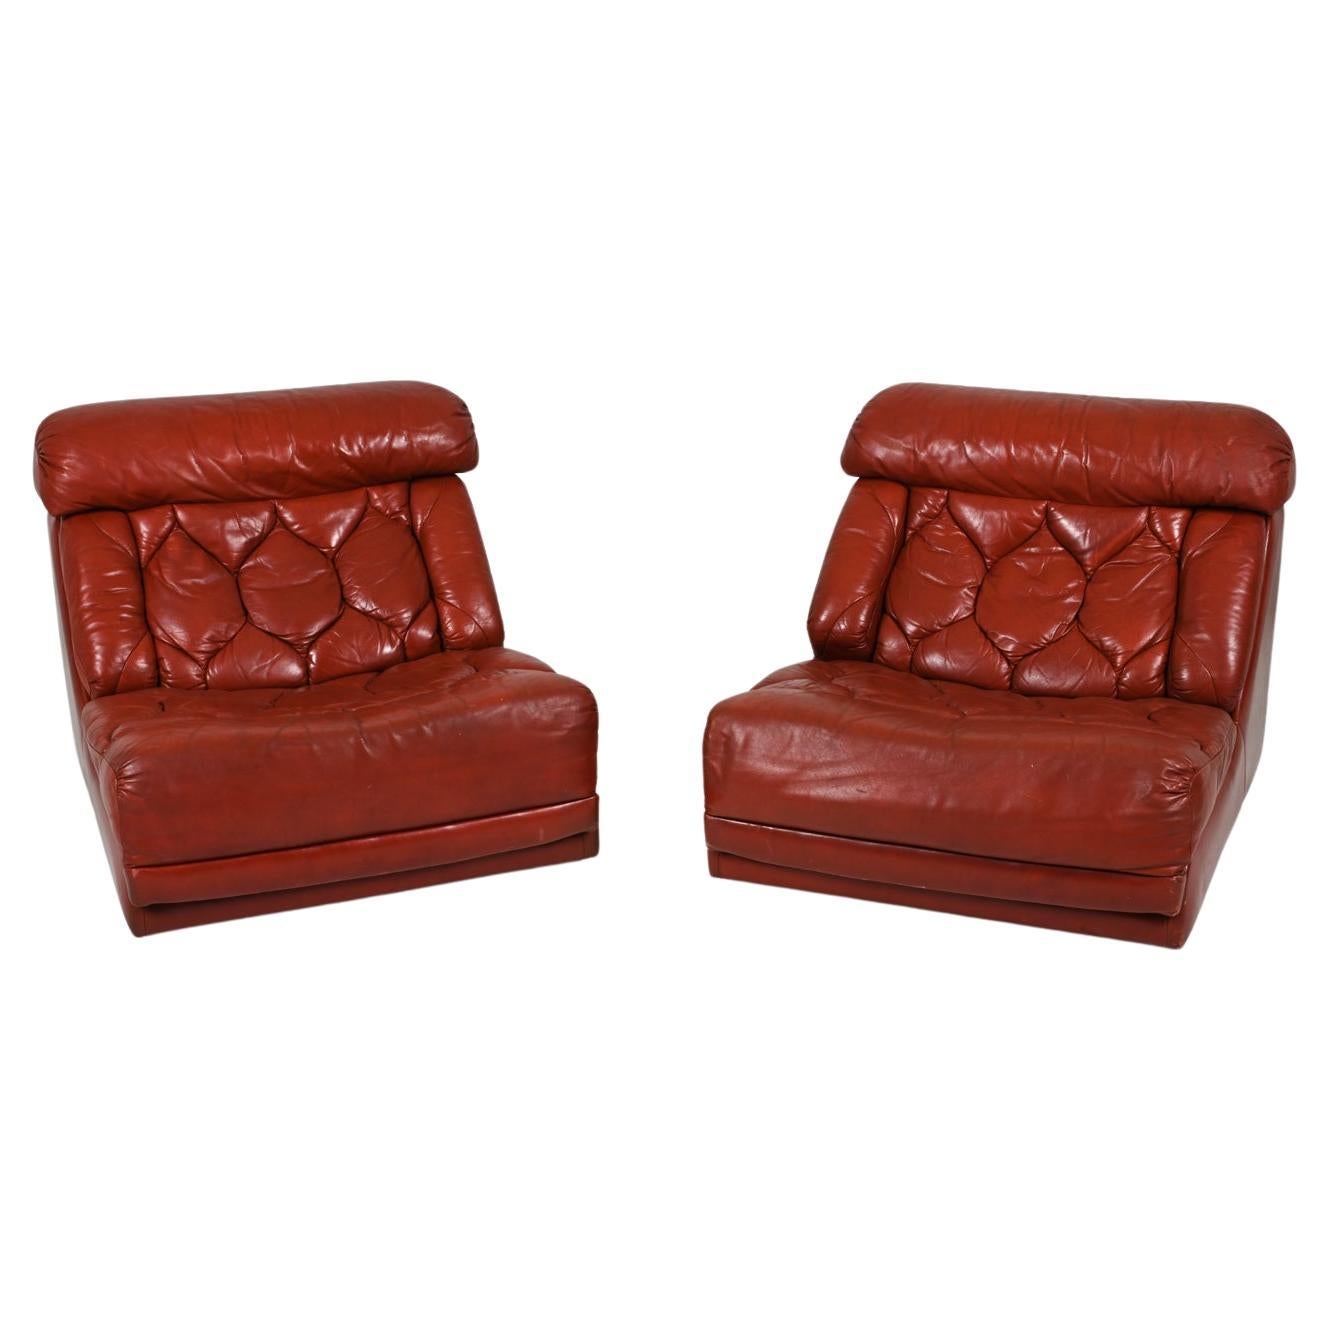 Pair of British Space Age Modular Leather Lounge Chairs by Tetrad